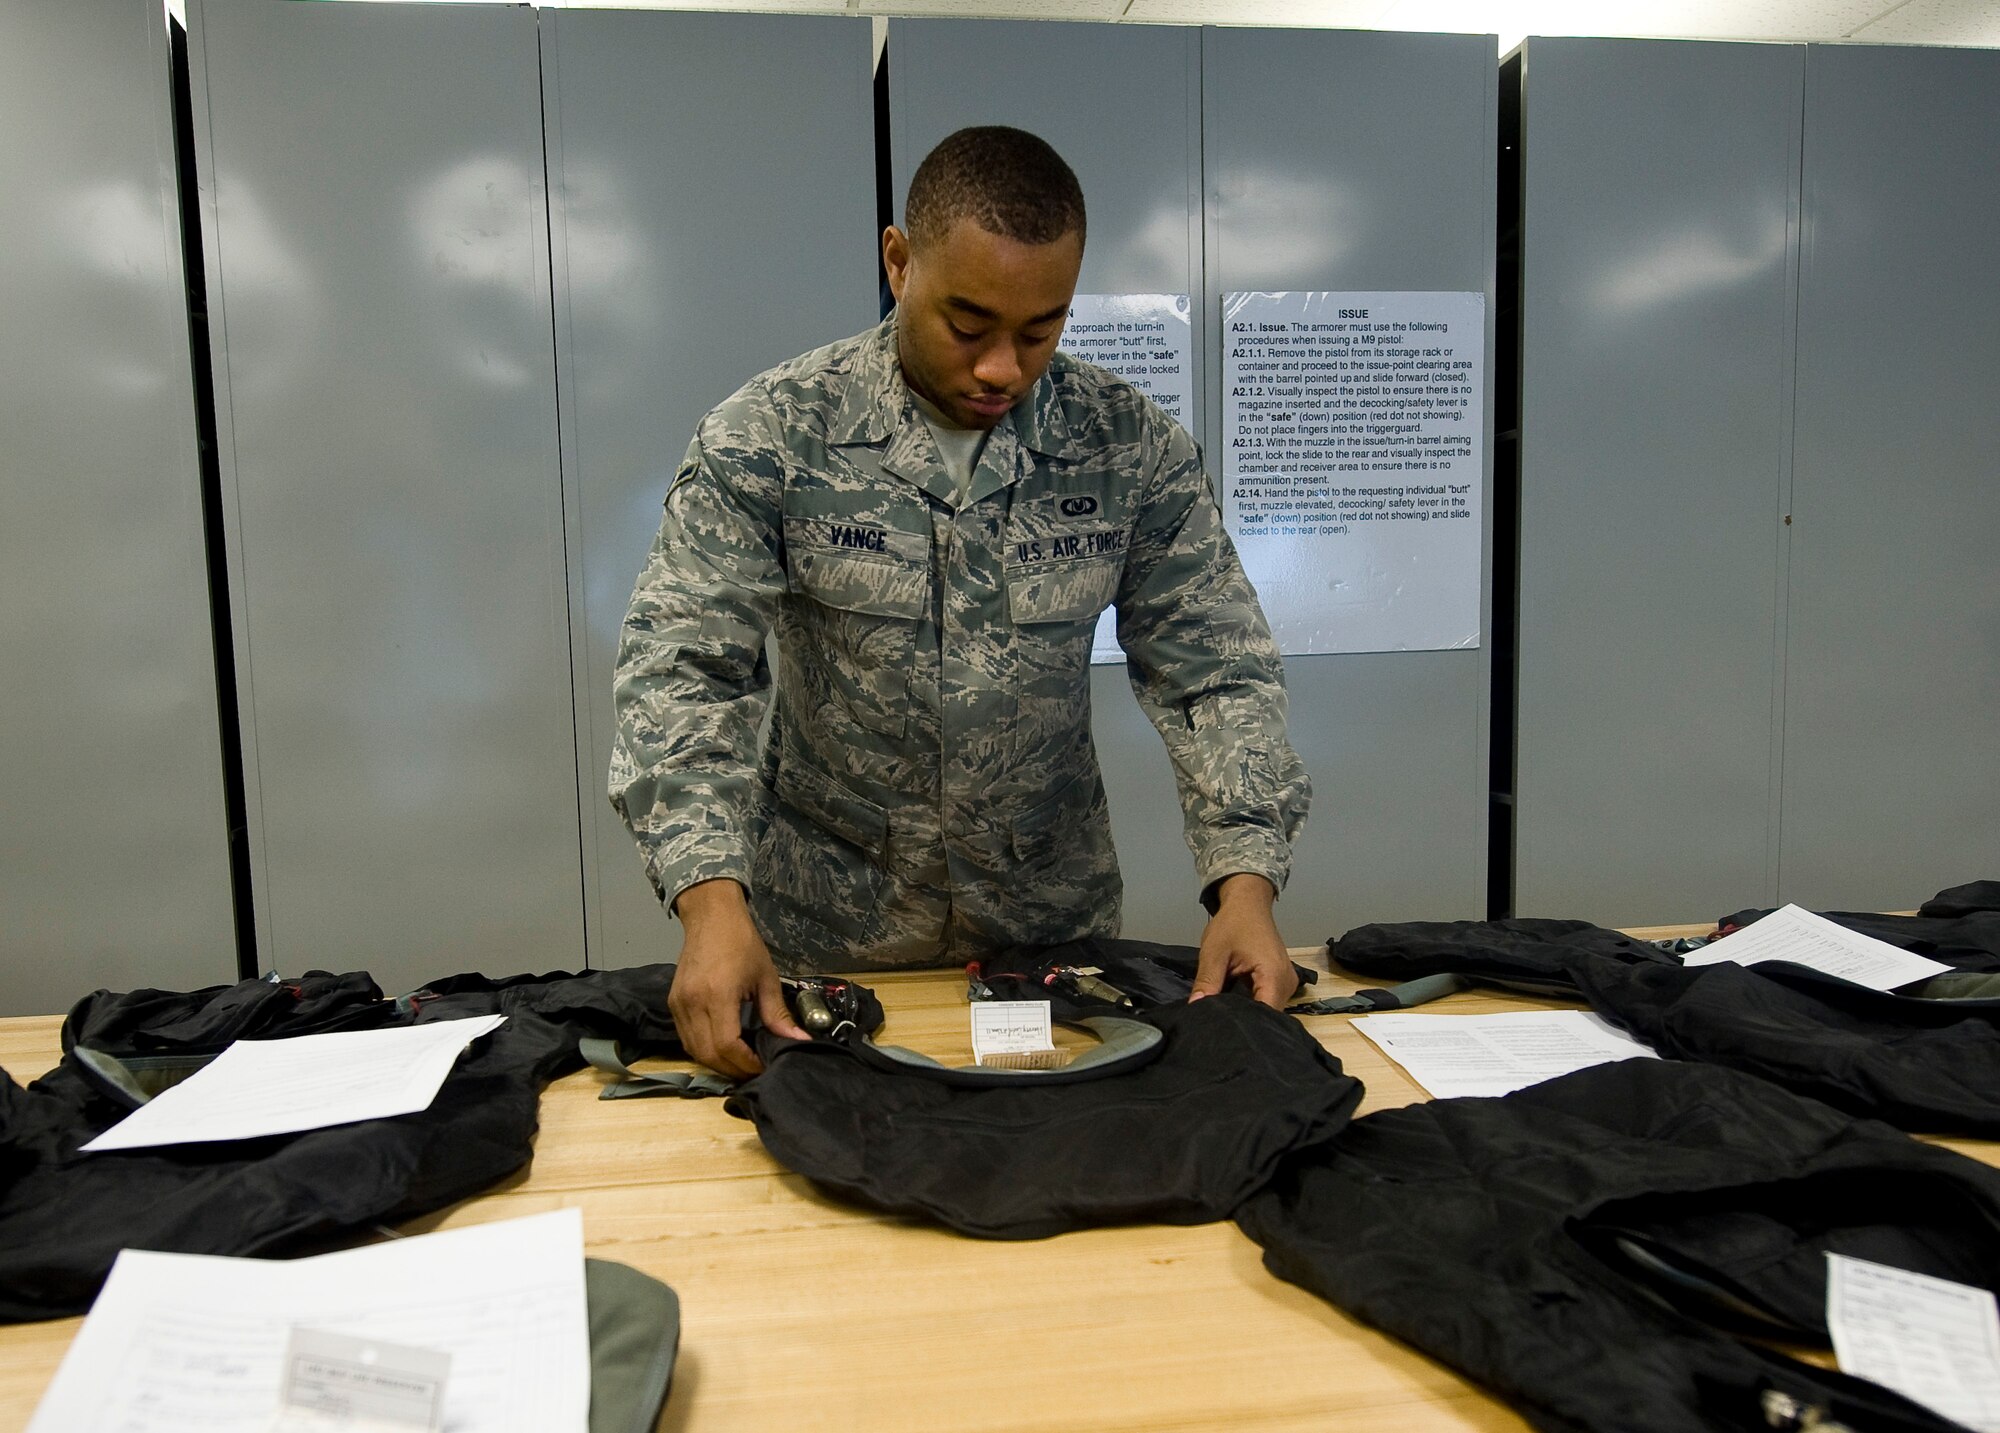 Airman Delonte Vance, 2nd Operations Support Squadron aircrew flight equipment journeyman, inspects a life preserver unit on Barksdale Air Force Base, La., July 19. The LPUs must be inspected yearly along with survival vests and other equipment. Other pieces, such as helmets and oxygen masks, are inspected every 30 days. LPUs inflate with air to help the wearer float if they are forced to eject over water. (U.S. Air Force photo/Staff Sgt. Chad Warren)(RELEASED)